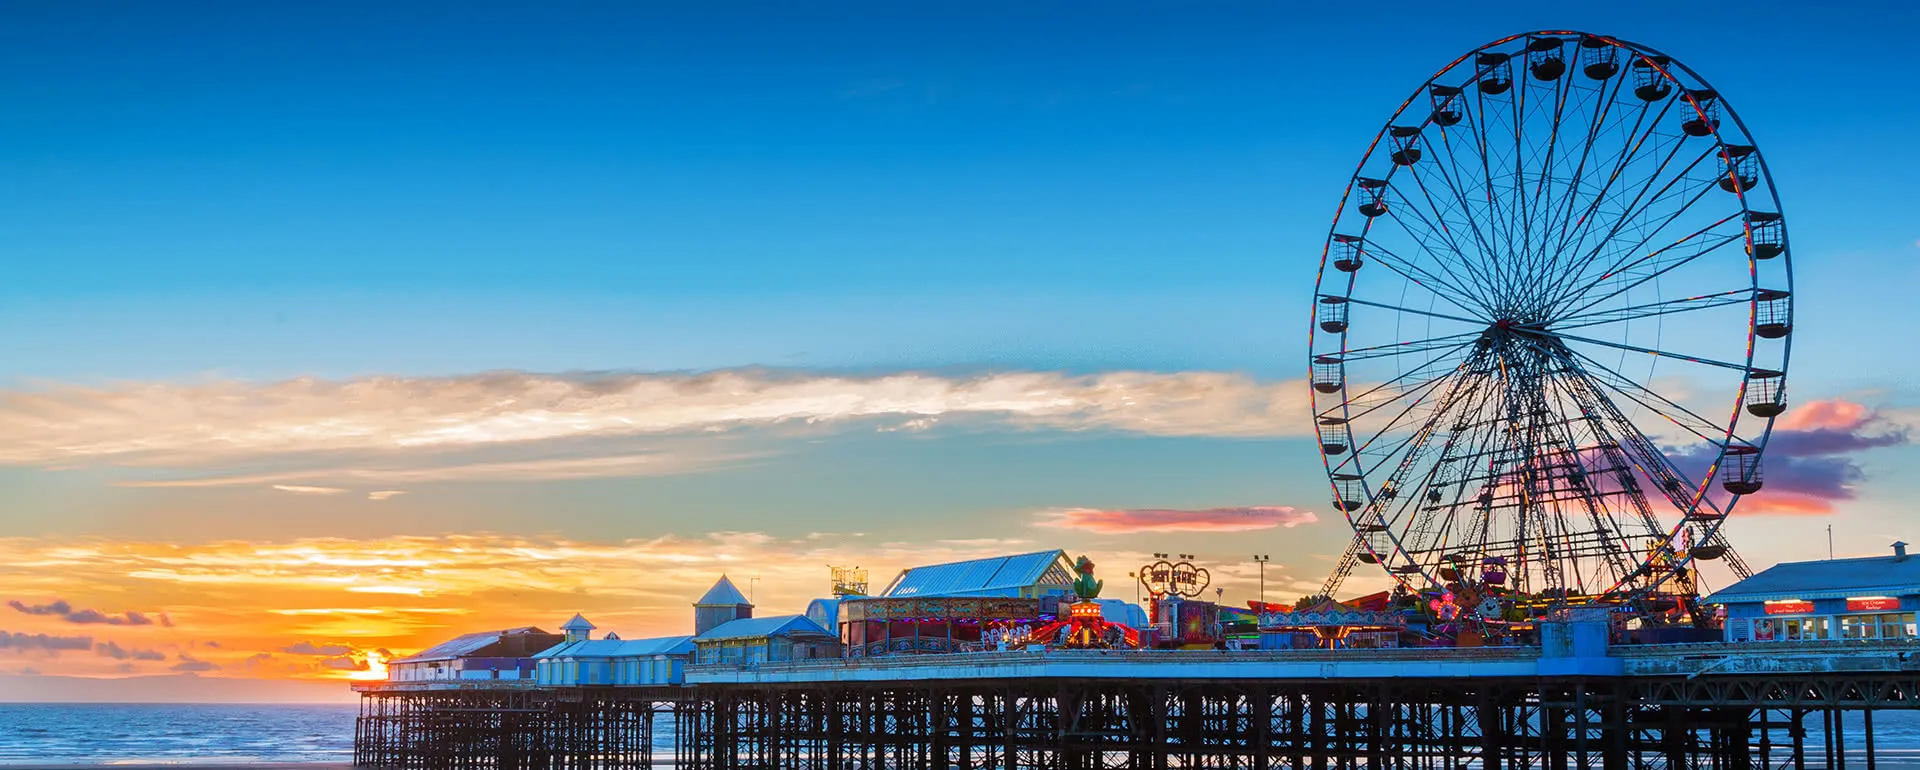 Blackpool - the destination for workers